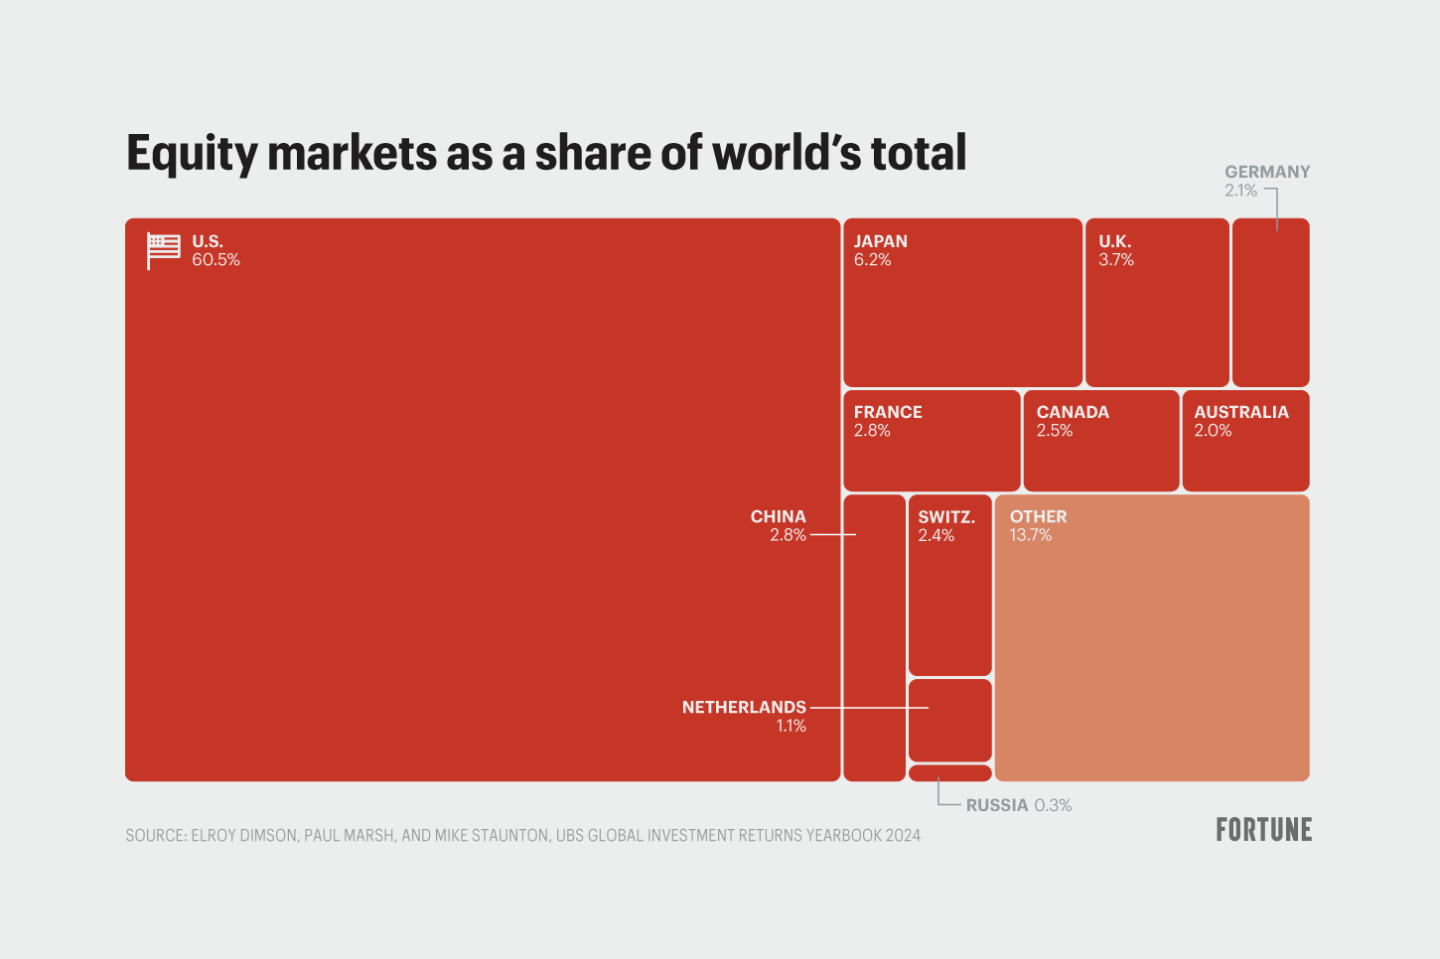 Chart shows the top equity markets in the world